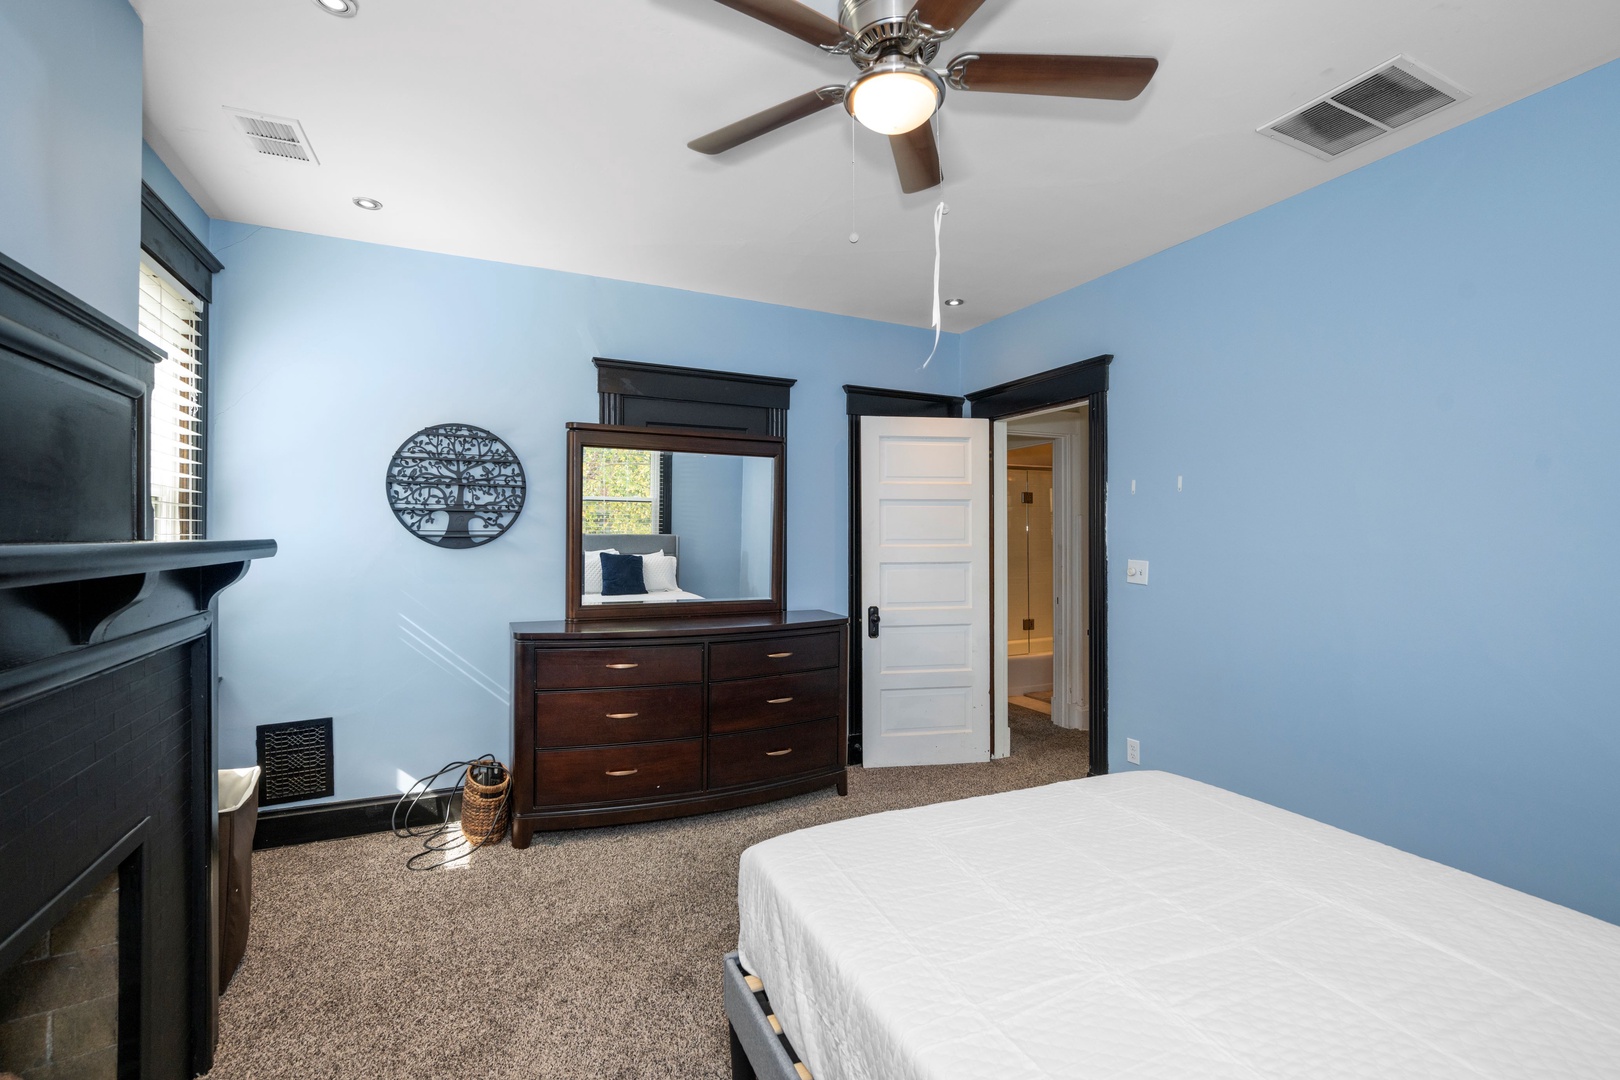 The 1st of 2 queen bedrooms on the second level, with a dresser & ceiling fan